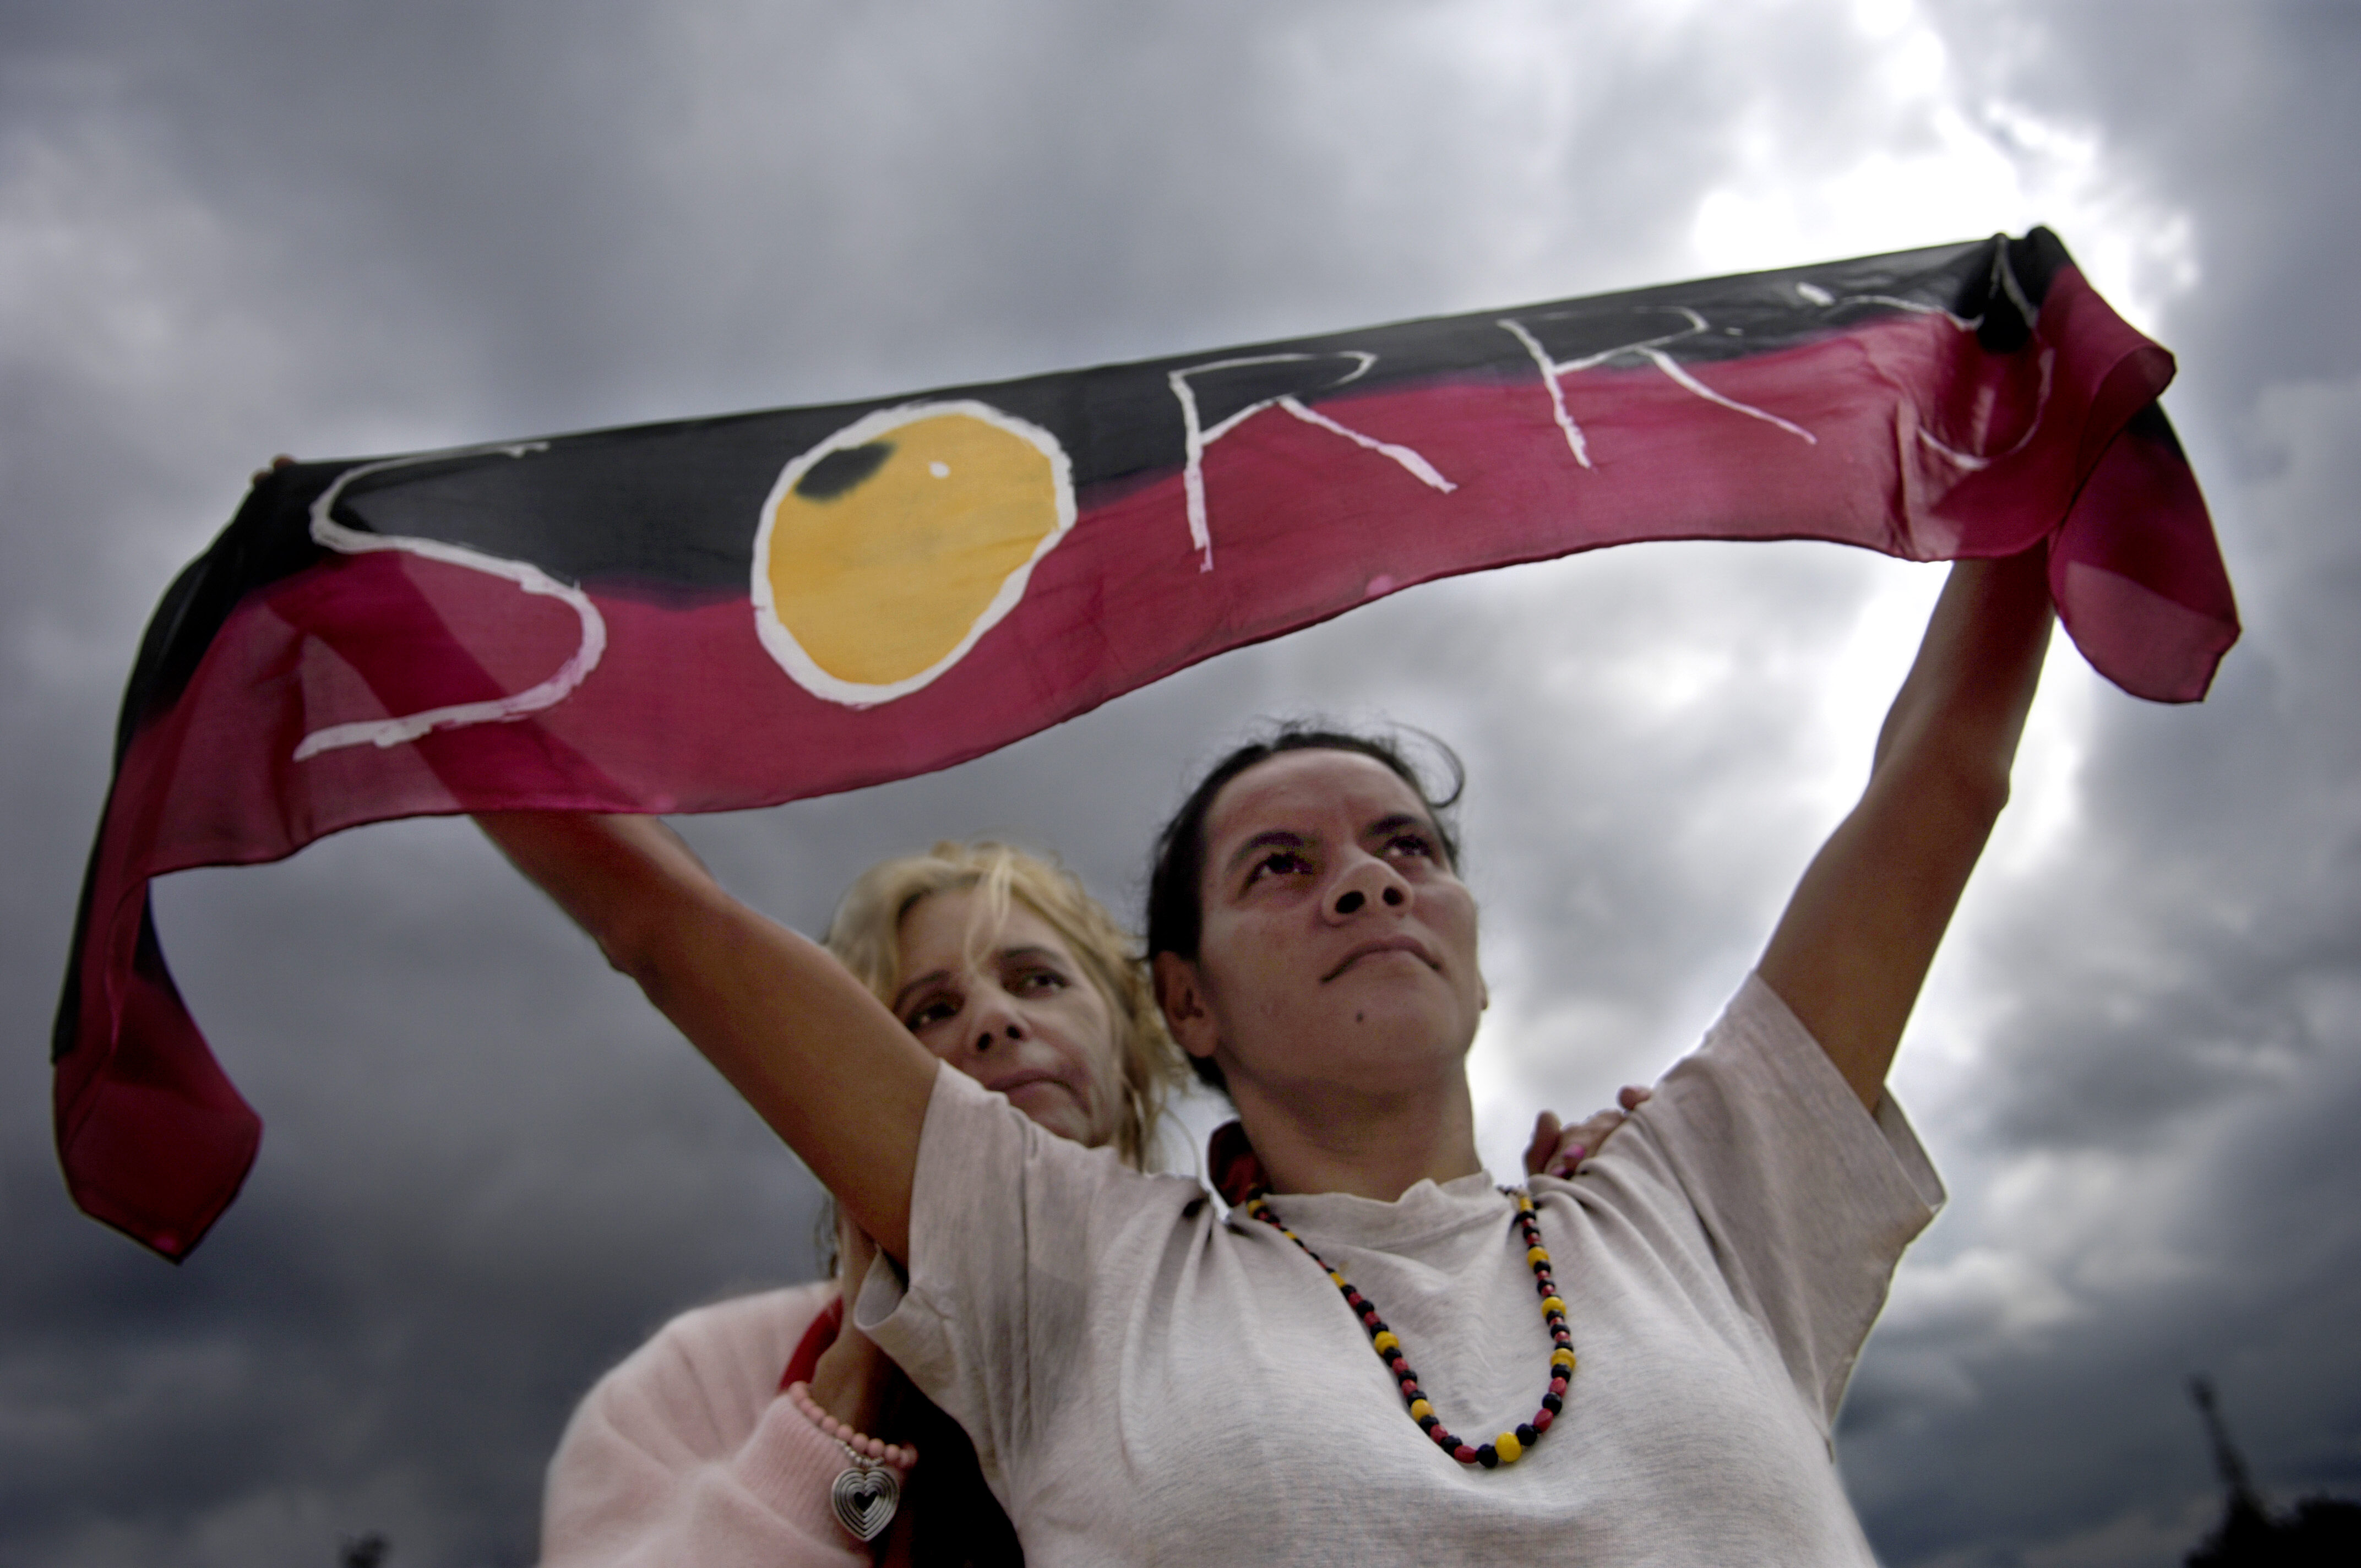 Rhonda Randall and Sharon Mumbler stand proud with their "Sorry" scarf as  Kevin Rudd's Broadcast apology to Aboriginal Peoples of Australia at Penrith Council on February 13, 2008 in Penrith, Australia. (Newspix—Newspix via Getty Images)